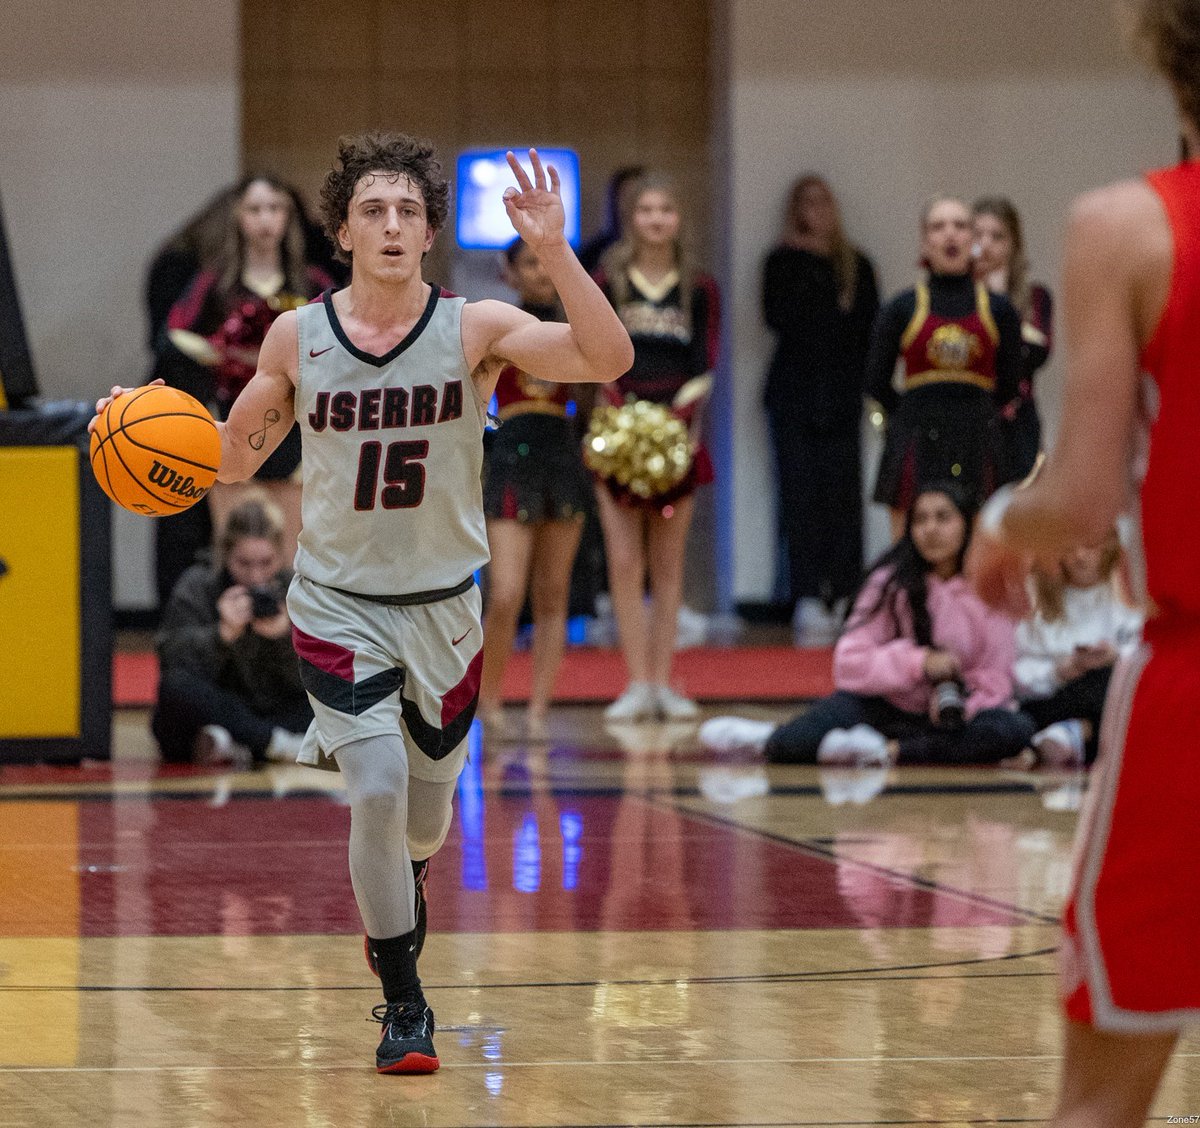 The postseason awards collection for @JSerra_Hoops senior Aidan Fowler (@AidanFowler24) now includes yet another major recognition. It was announced on Thursday that Fowler has been selected as the Orange County Register’s 2023-2024 Basketball Player of the Year. Fowler, who